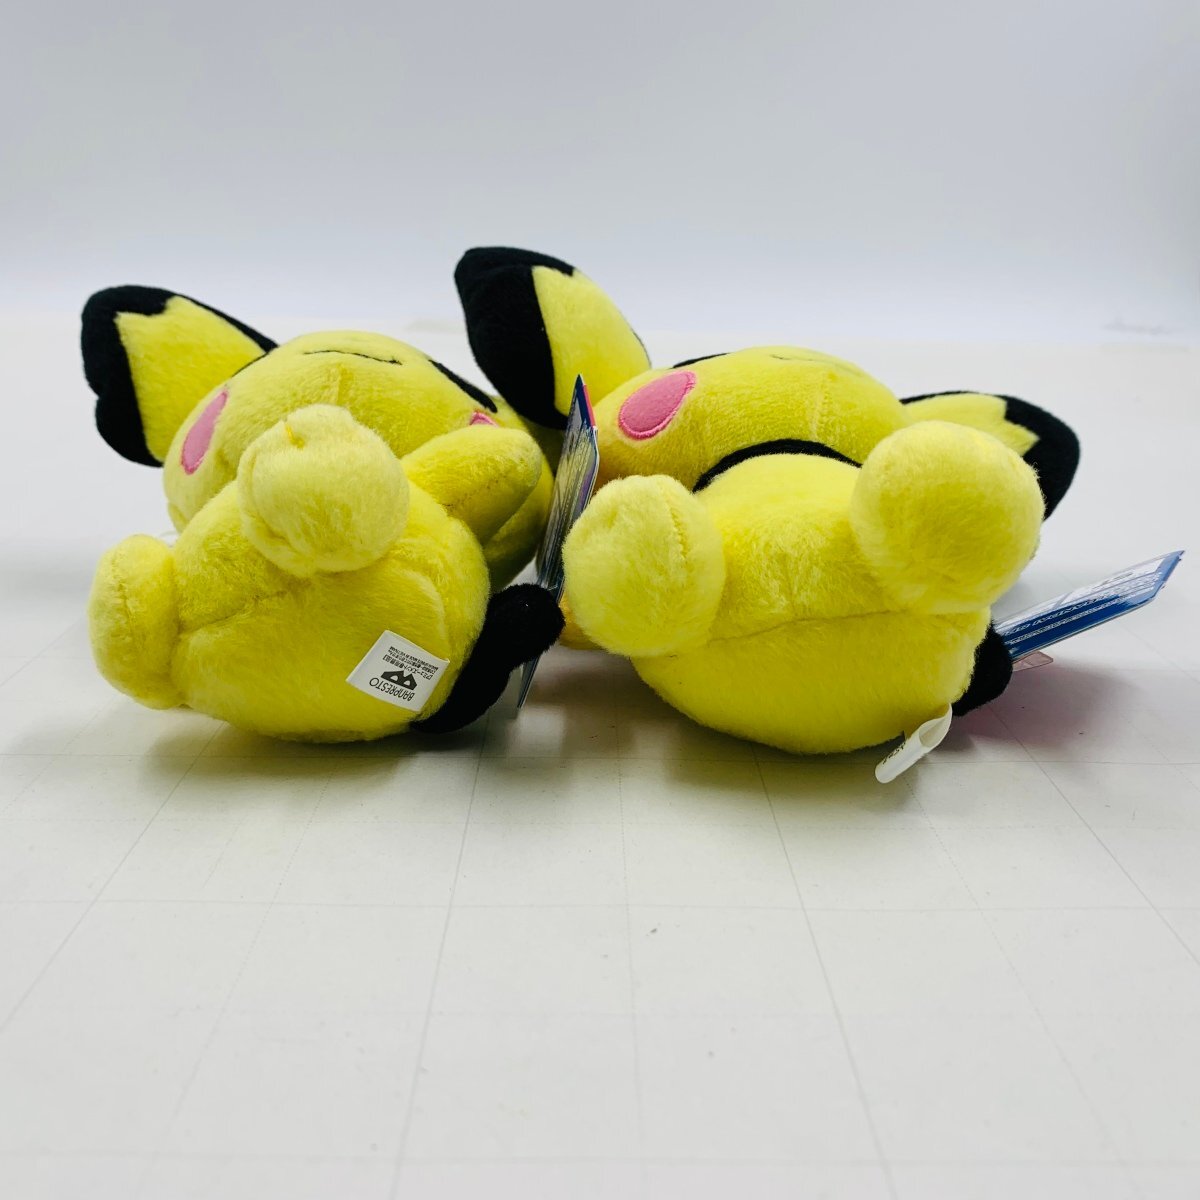  new goods Pocket Monster ... seeing seeing! soft toy pichu-2 point set 